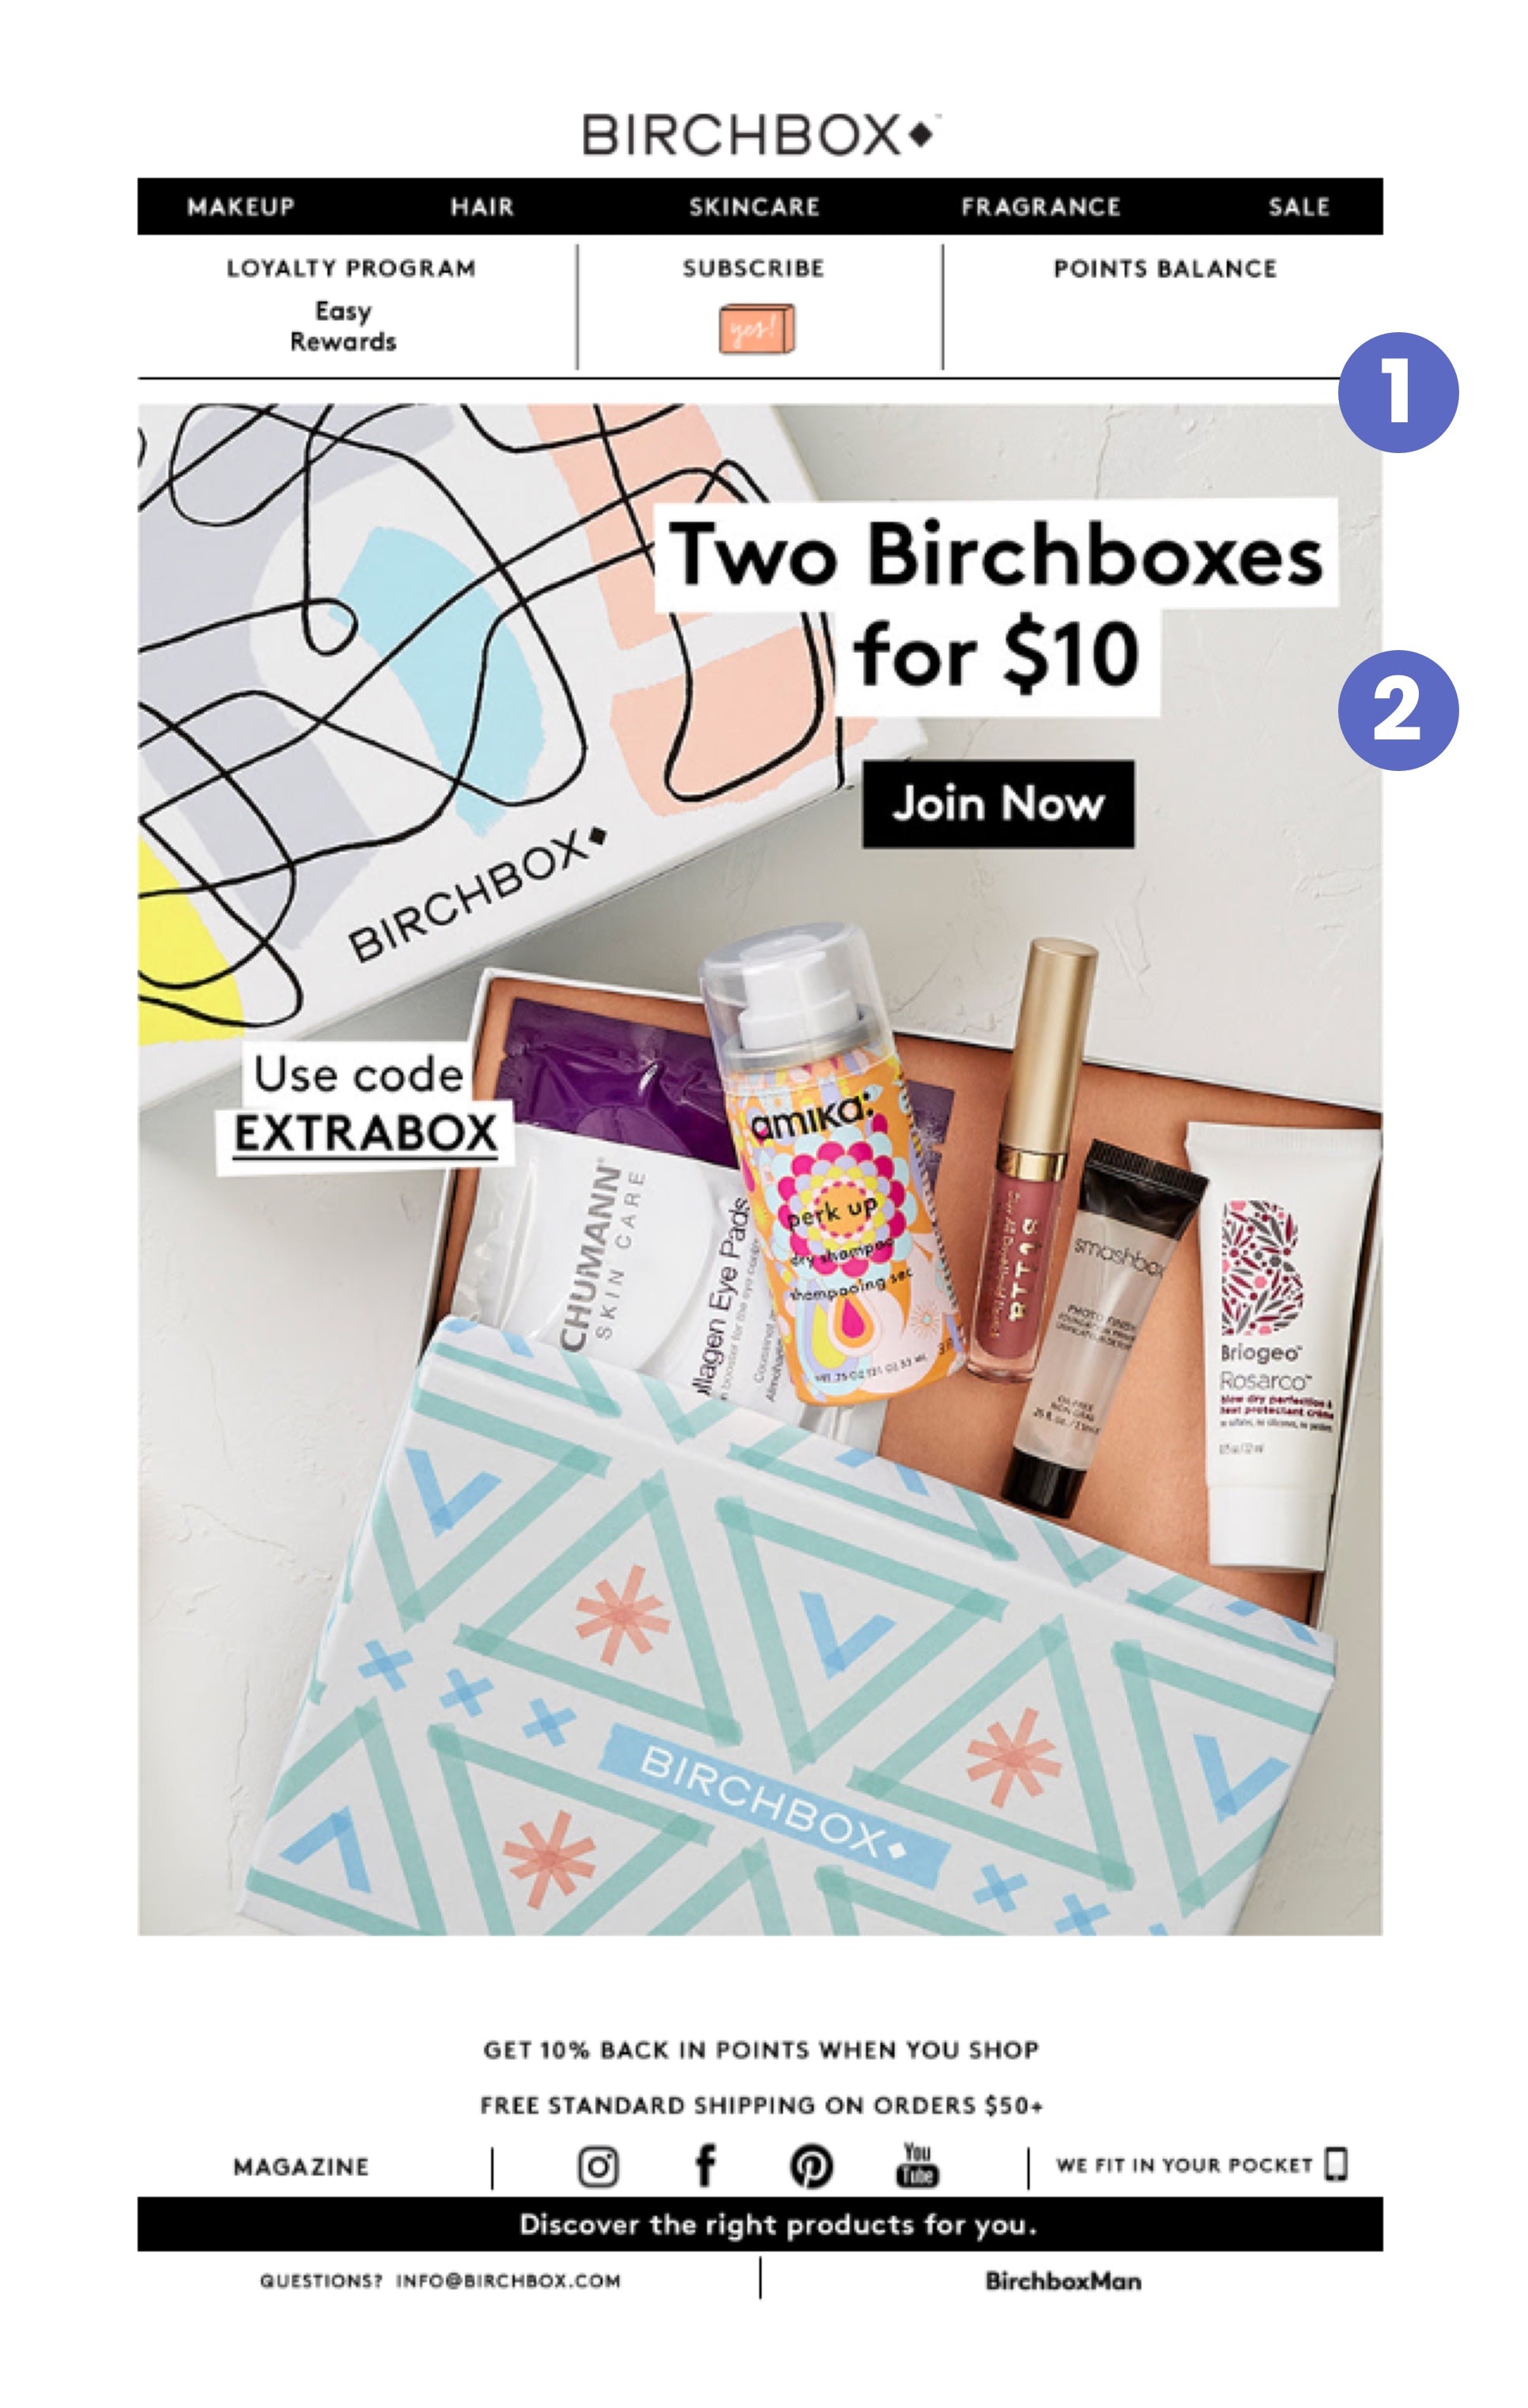 An ecommerce email marketing example from Birchbox